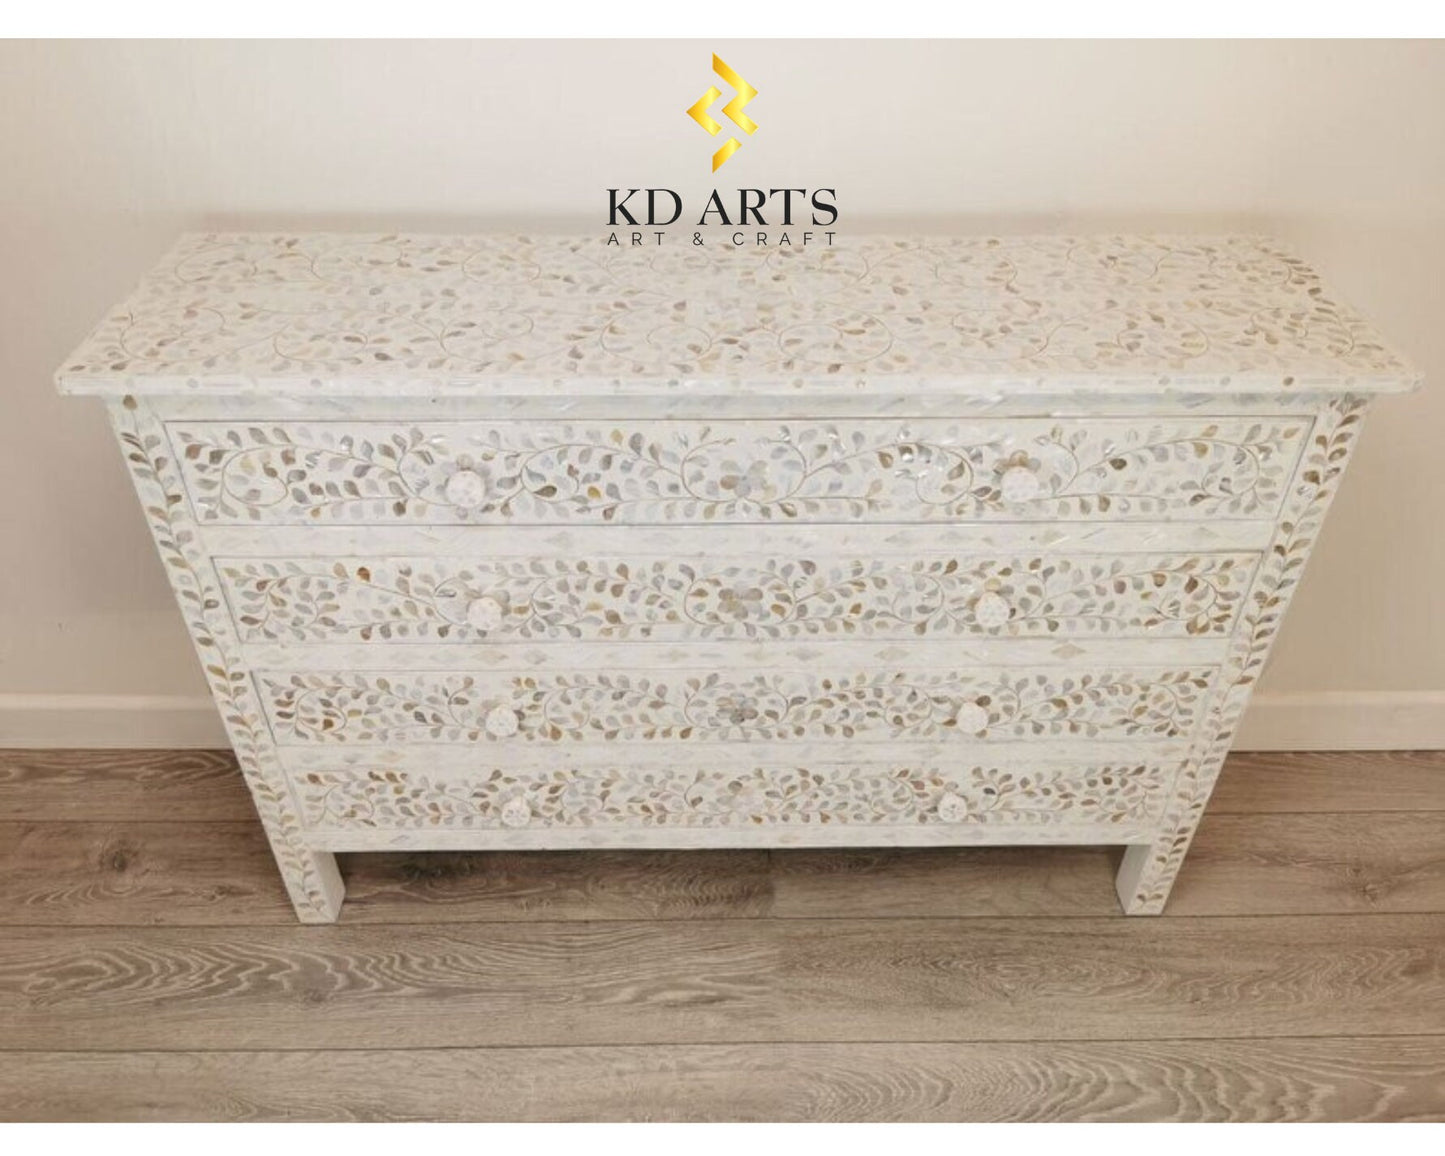 Handmade Mother Of Pearl Four Drawers Chest, Mother Of Pearl white Storage Unit, MOP white Dresser Table, MOP white Chest Of Drawer